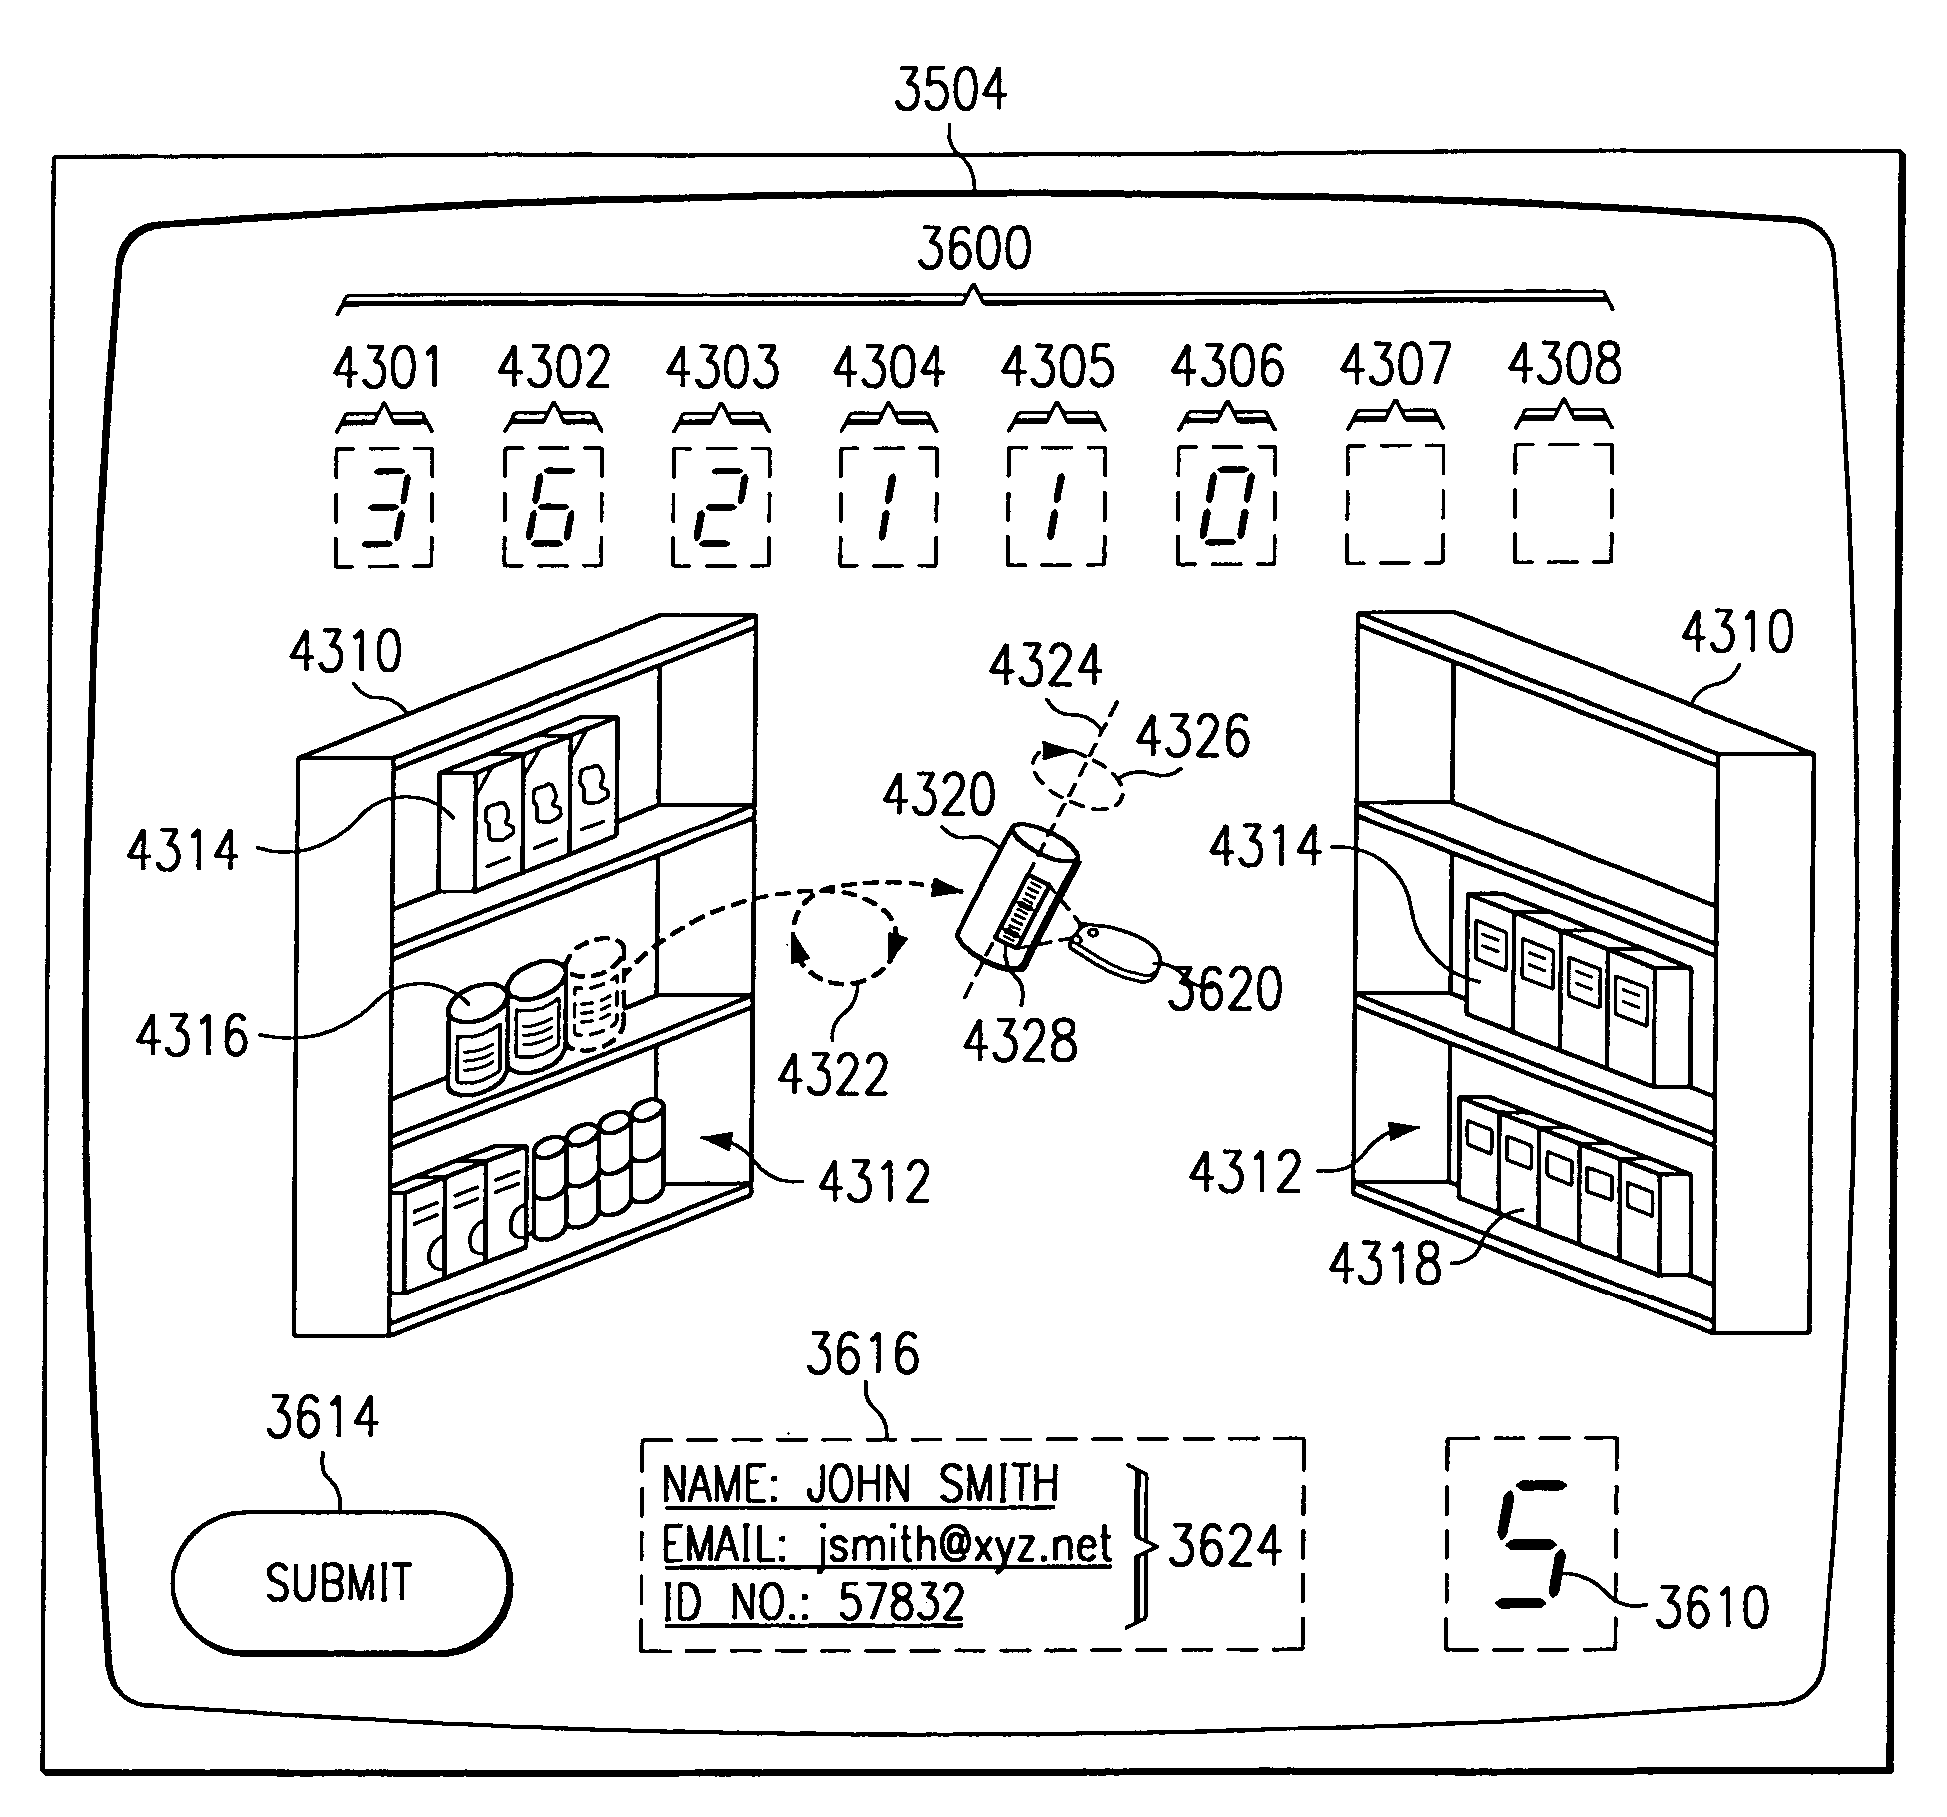 Method for conducting a contest using a network